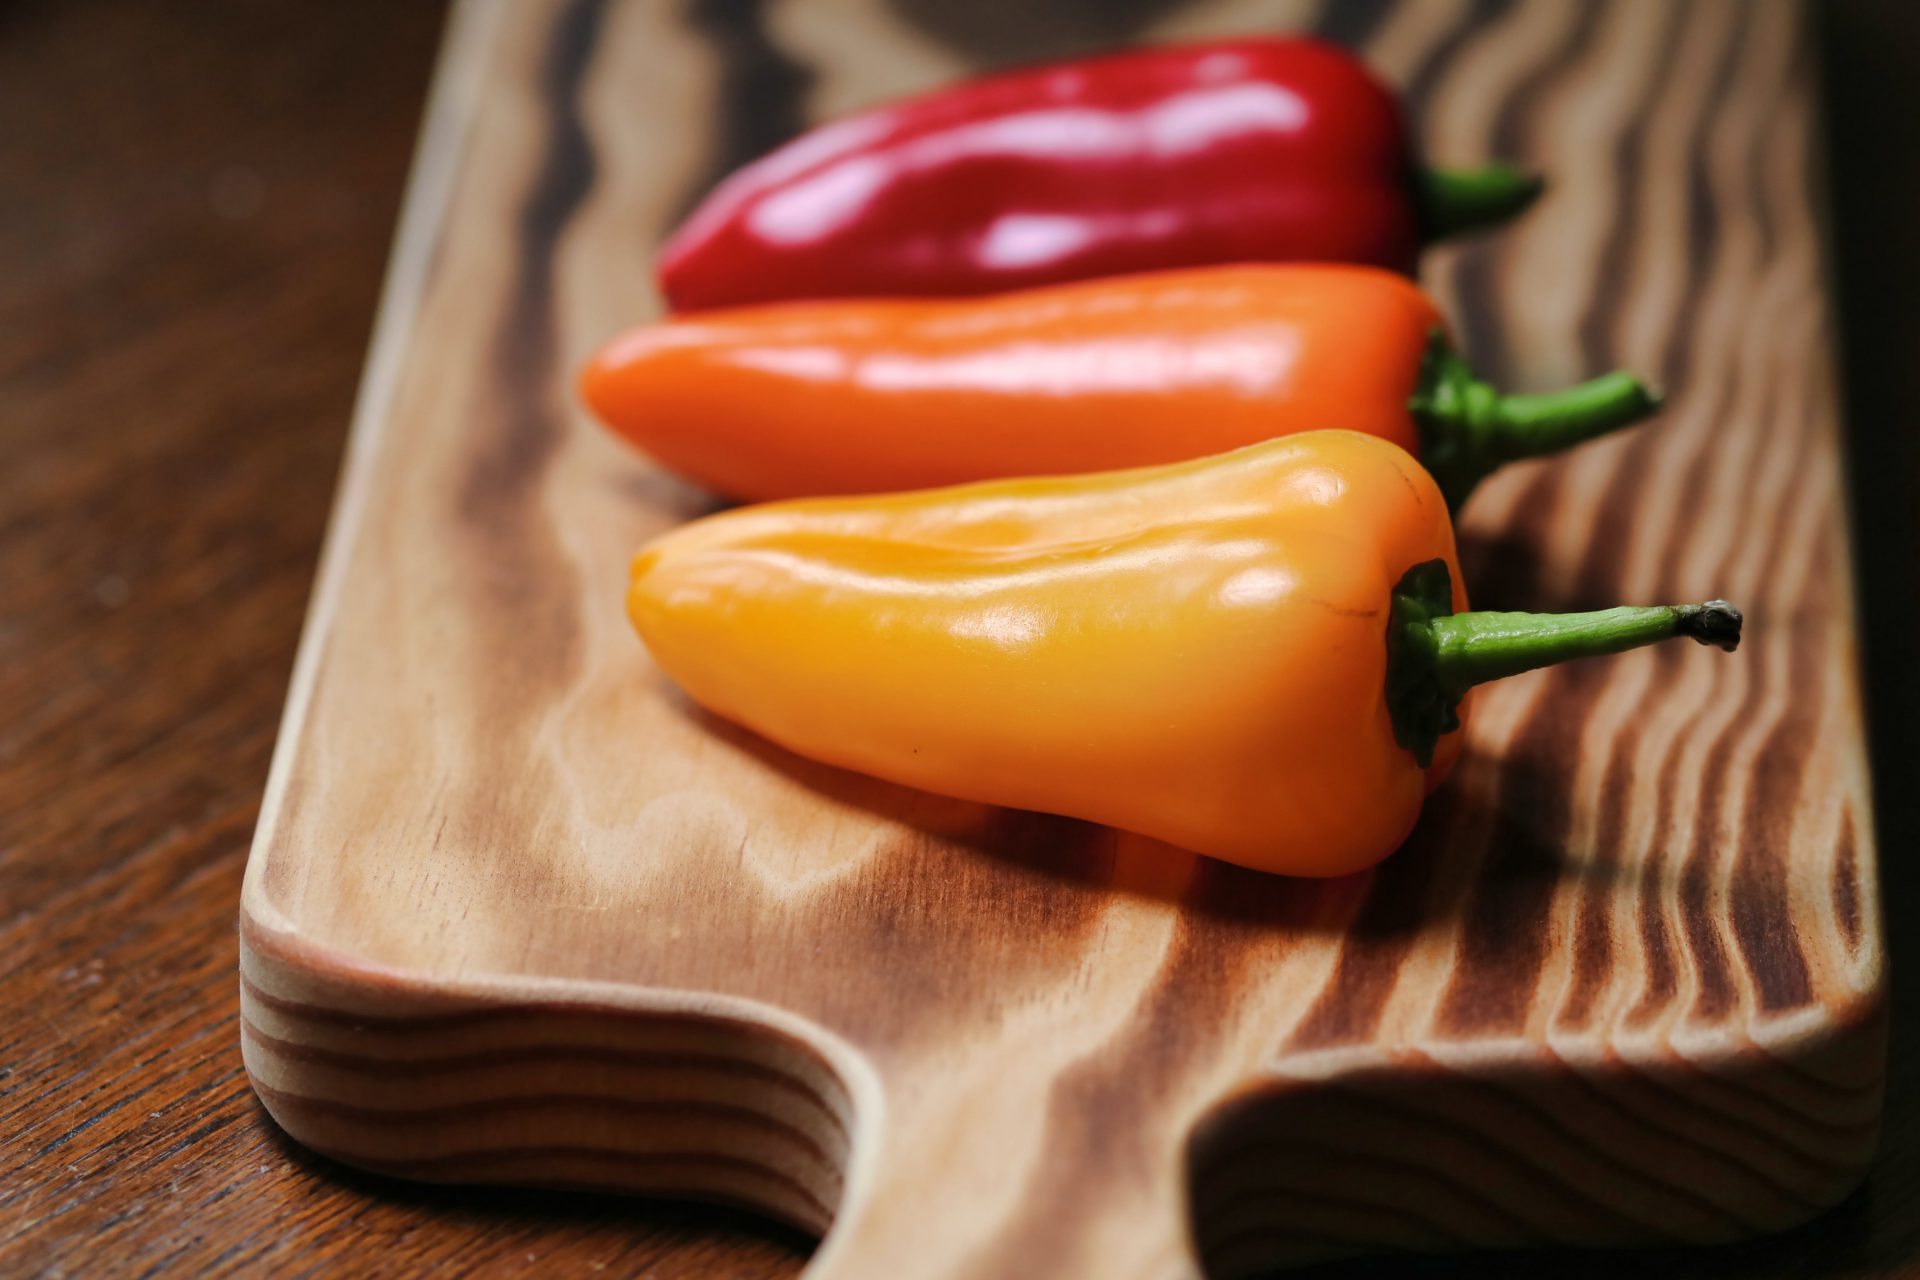 What are the different types of peppers?